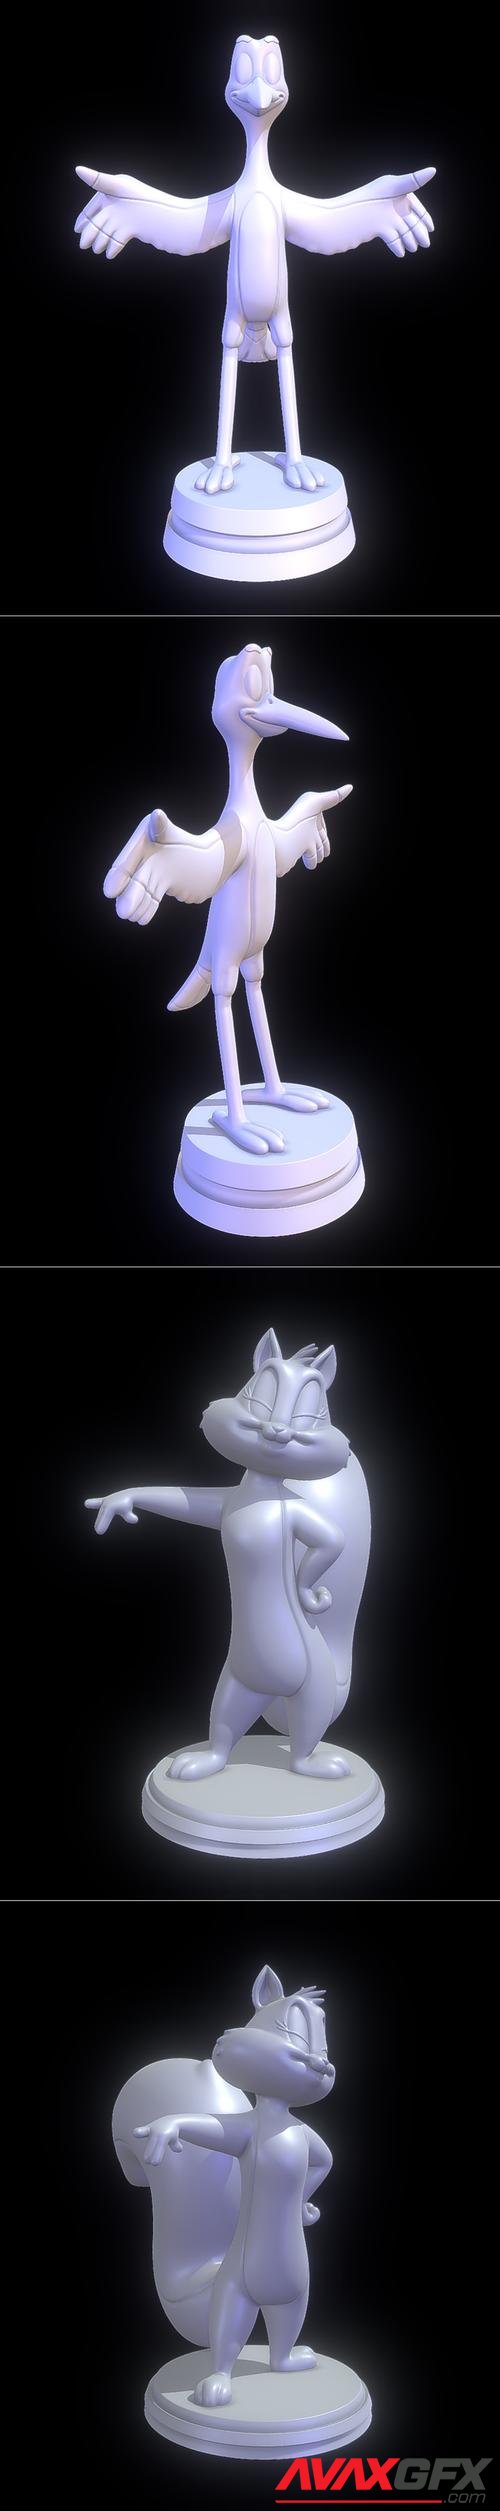 Whizzer - The Swan Princess and Penelope Pussycat - Looney Tunes – 3D Print